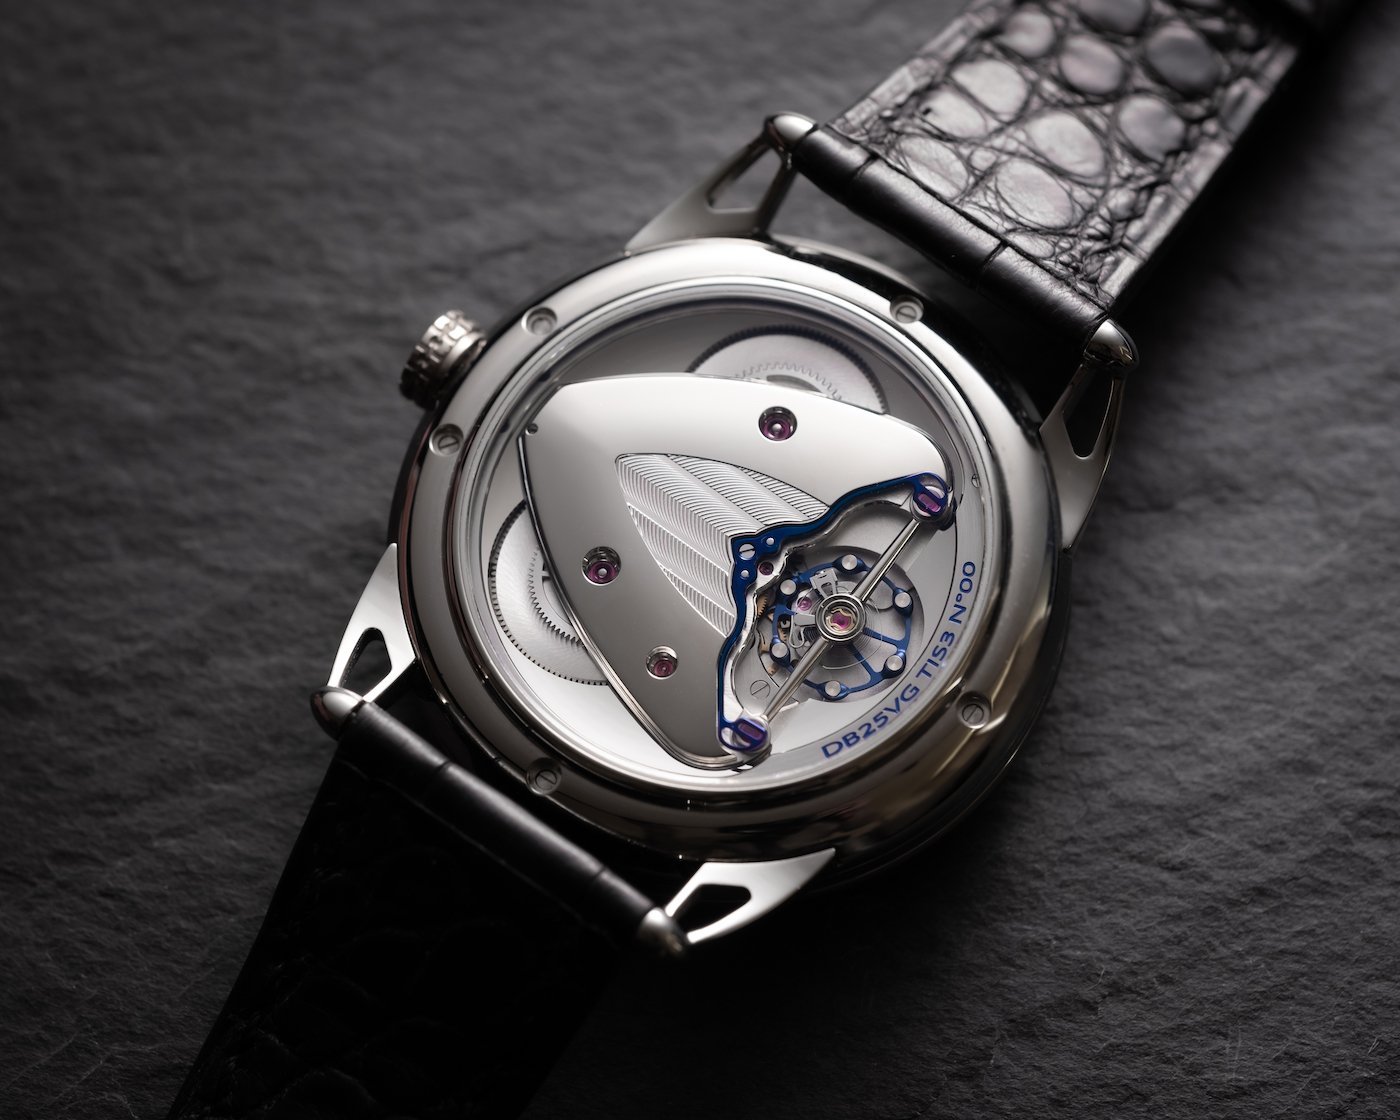 De Bethune's Starry Varius now with GMT function